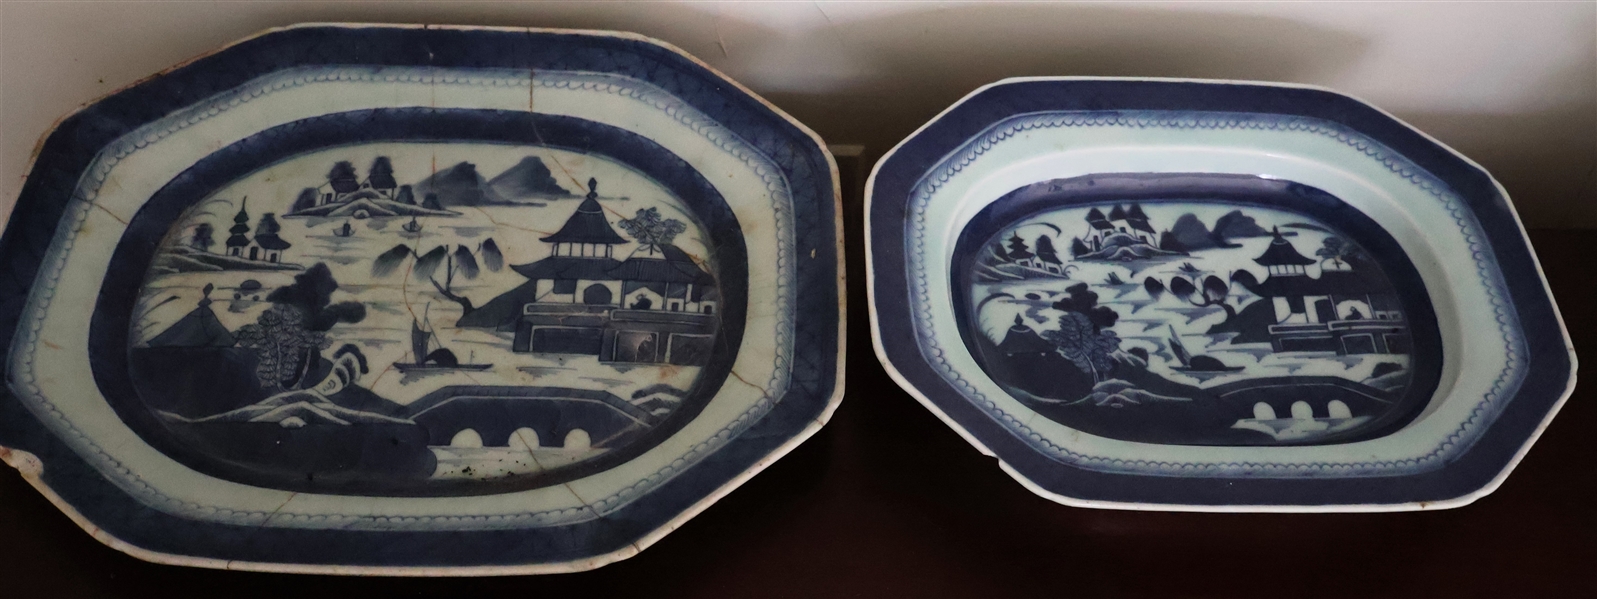 2 Blue and White Chinese Export Canton Platters - Larger Platter Has Early Stapled Repairs - Smaller Has Chip - Large Platter Measures 16 1/2" by 13 1/2" 